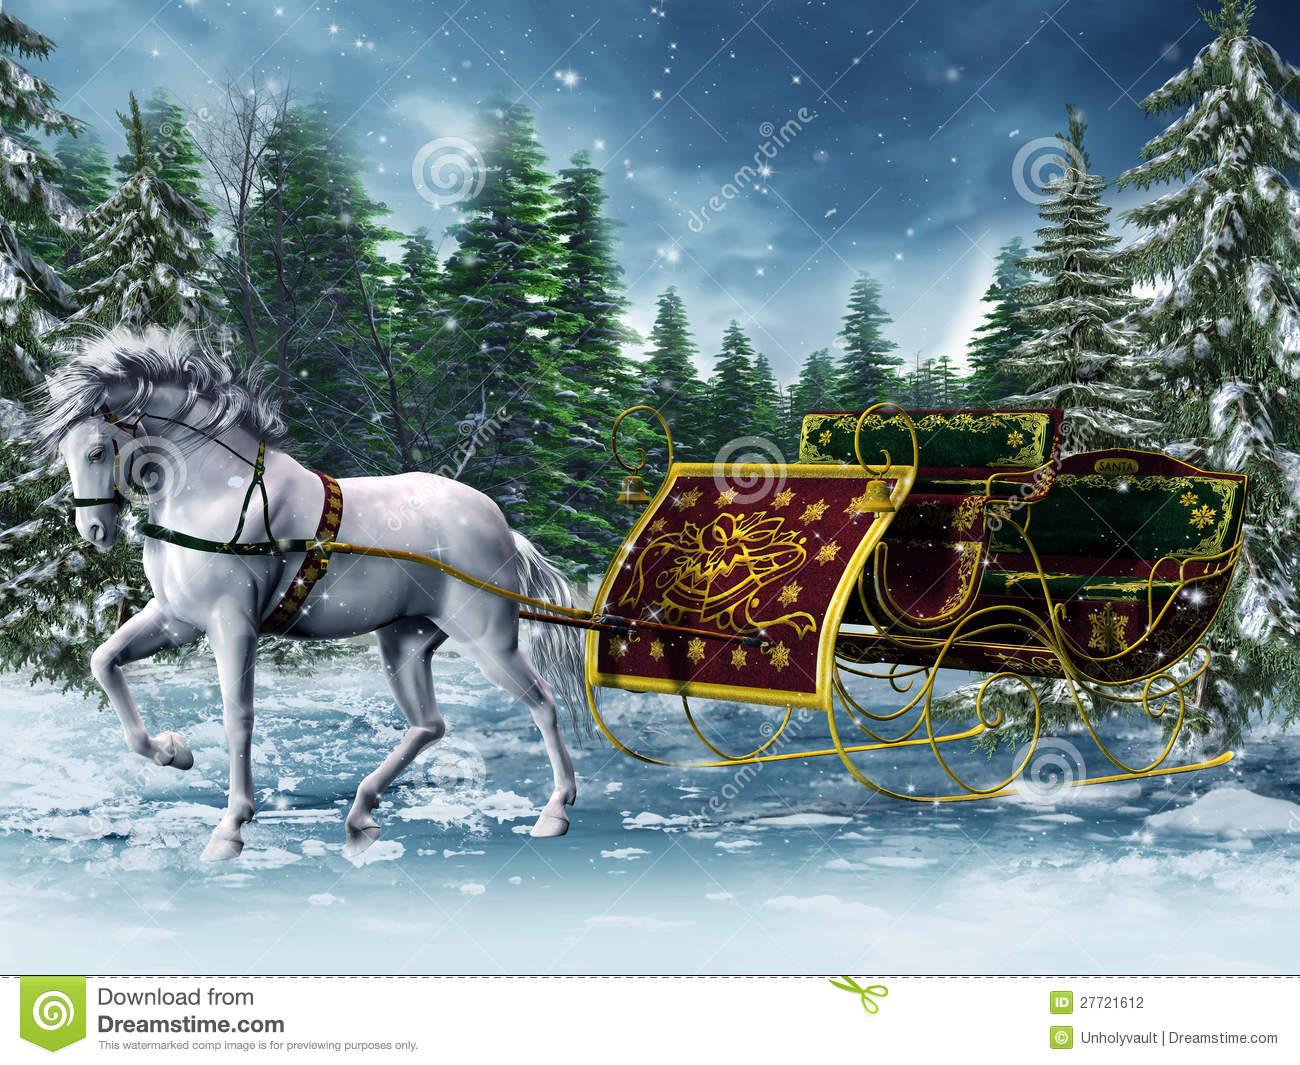 Free download Christmas Sleigh Picture All Wallpaper New